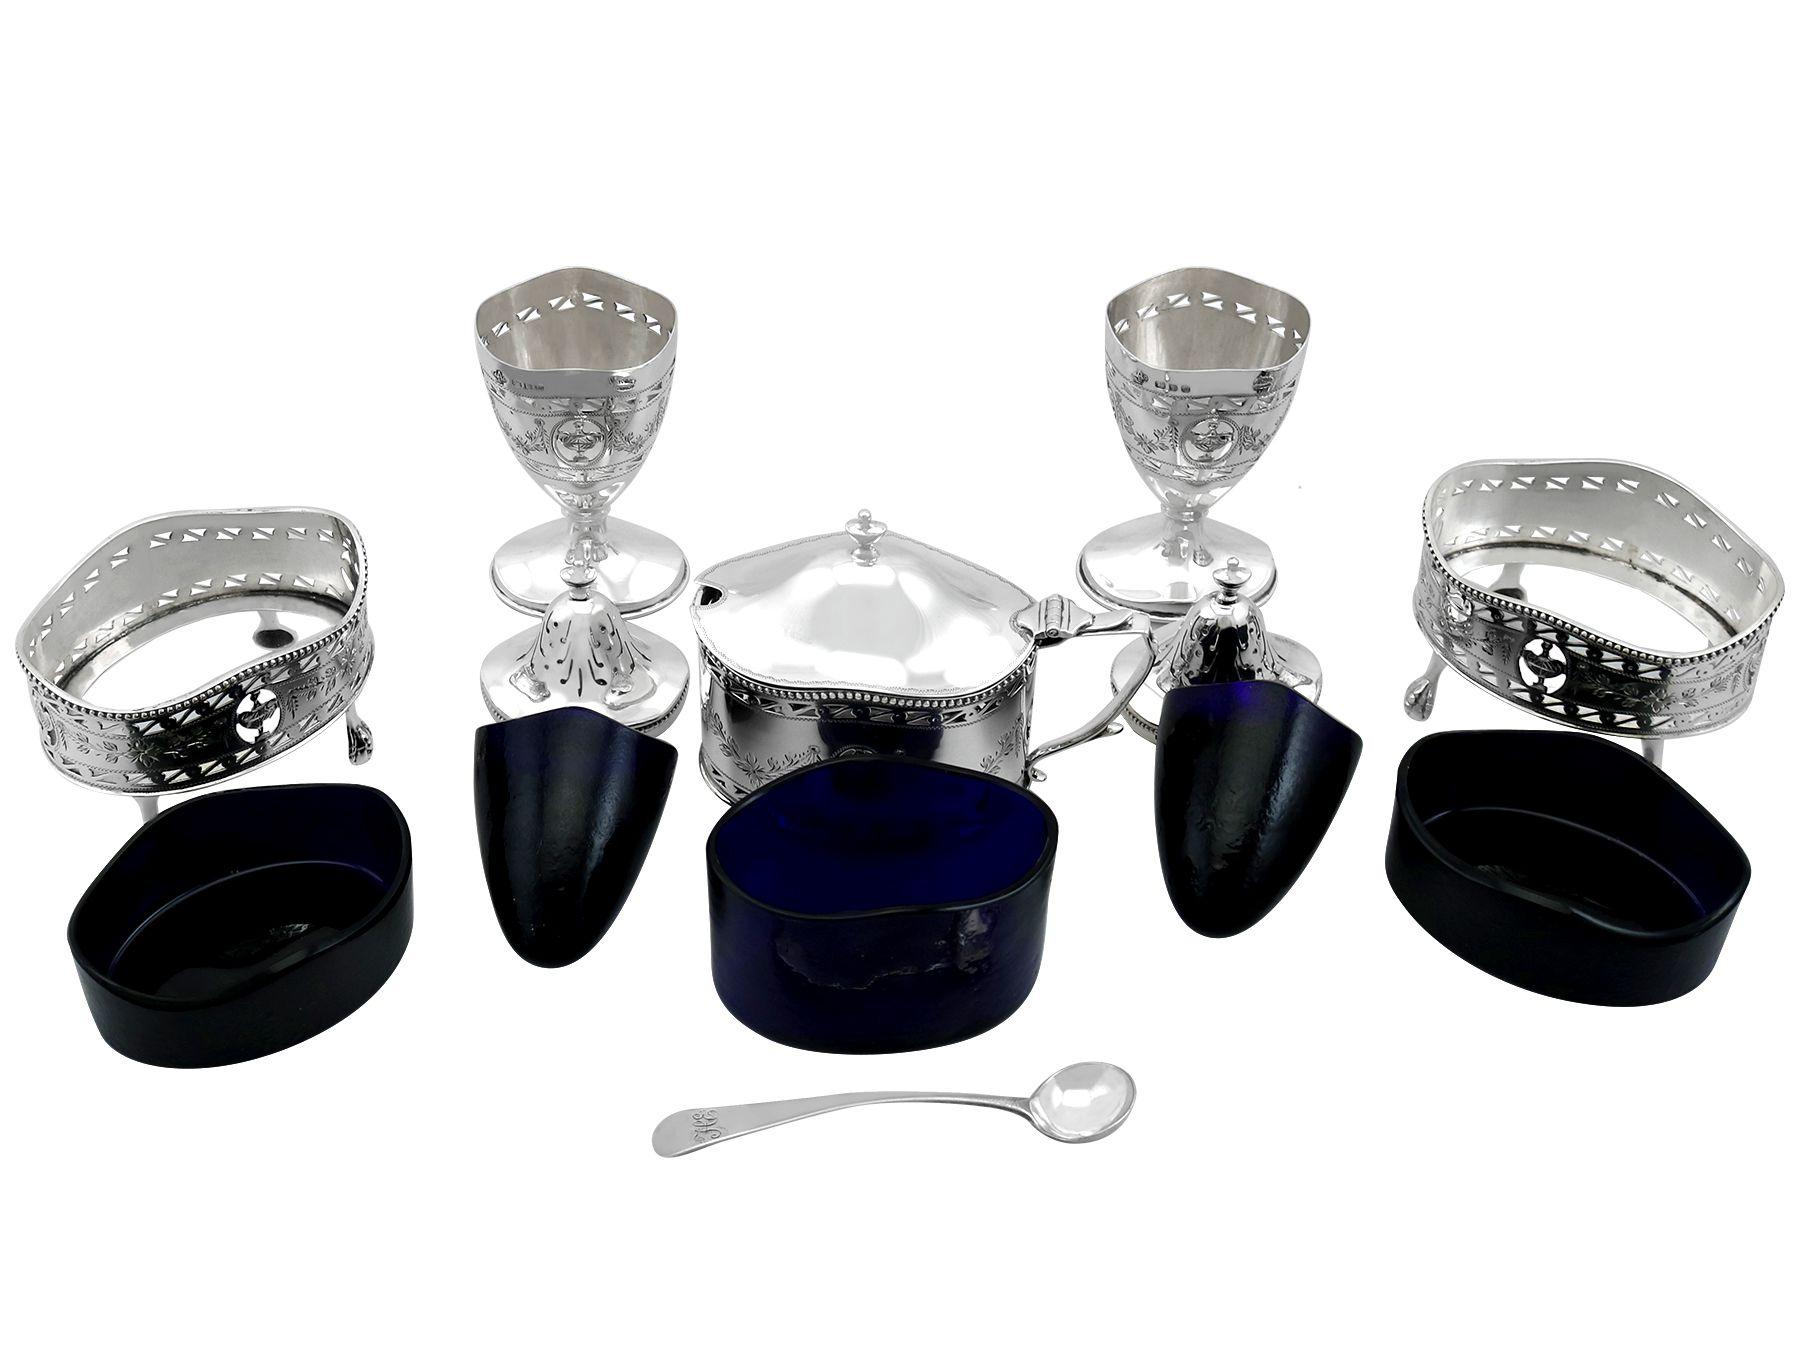 An exceptional, fine and impressive vintage Elizabeth II English sterling silver five piece condiment / cruet set made in the Adams style; an addition to our dining silverware collection

This exceptional and large vintage 5 piece condiment set in